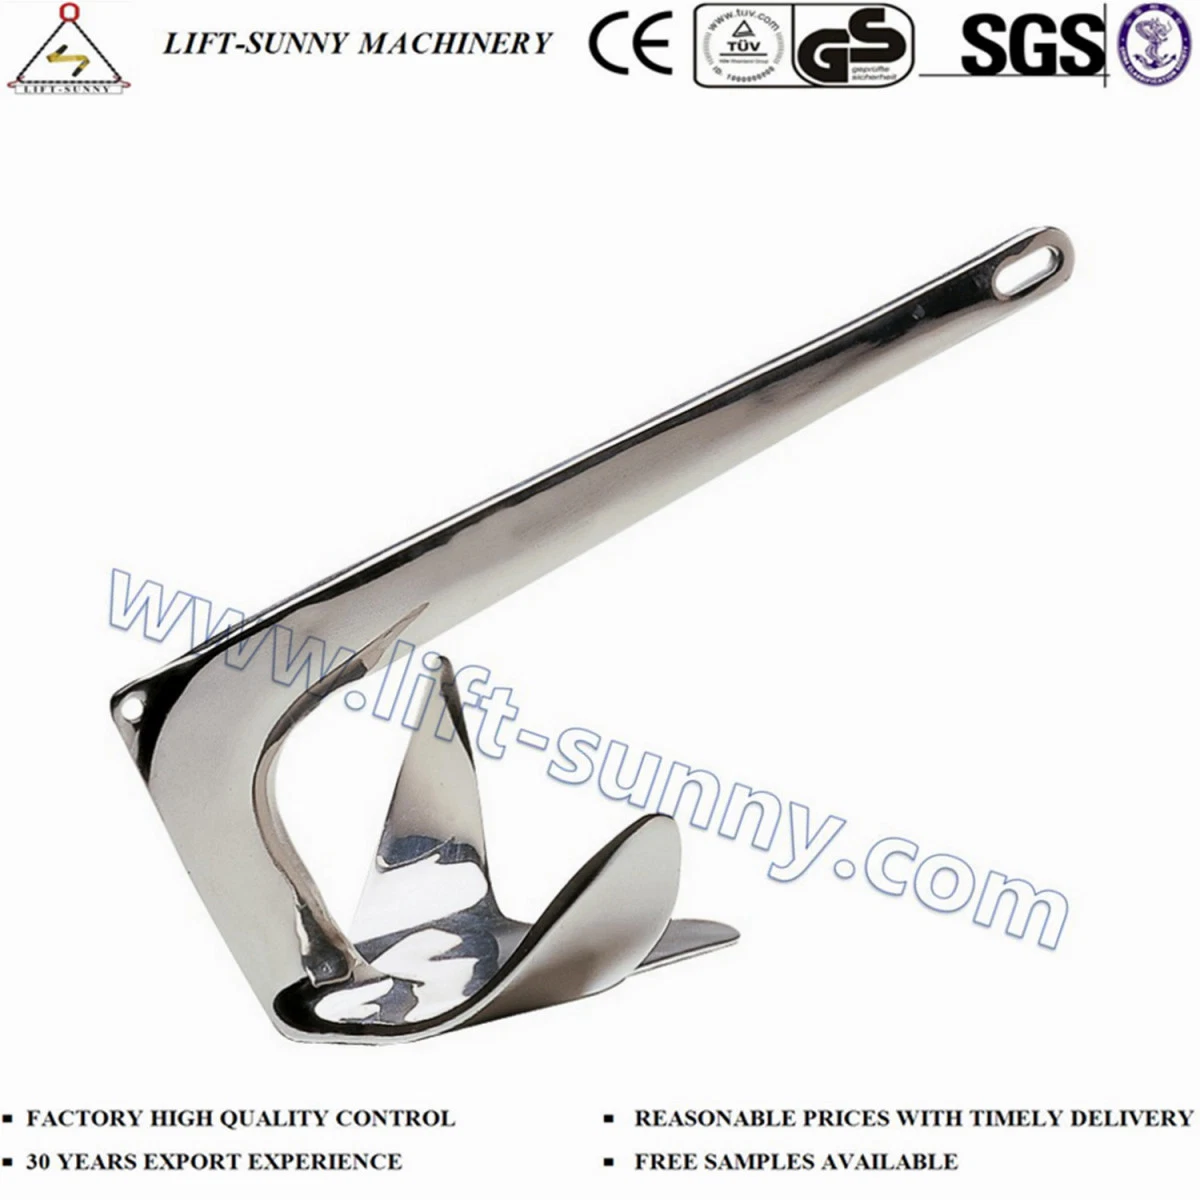 Stainless Steel Bruce Anchor Boat Anchor for Marine Ship Boat